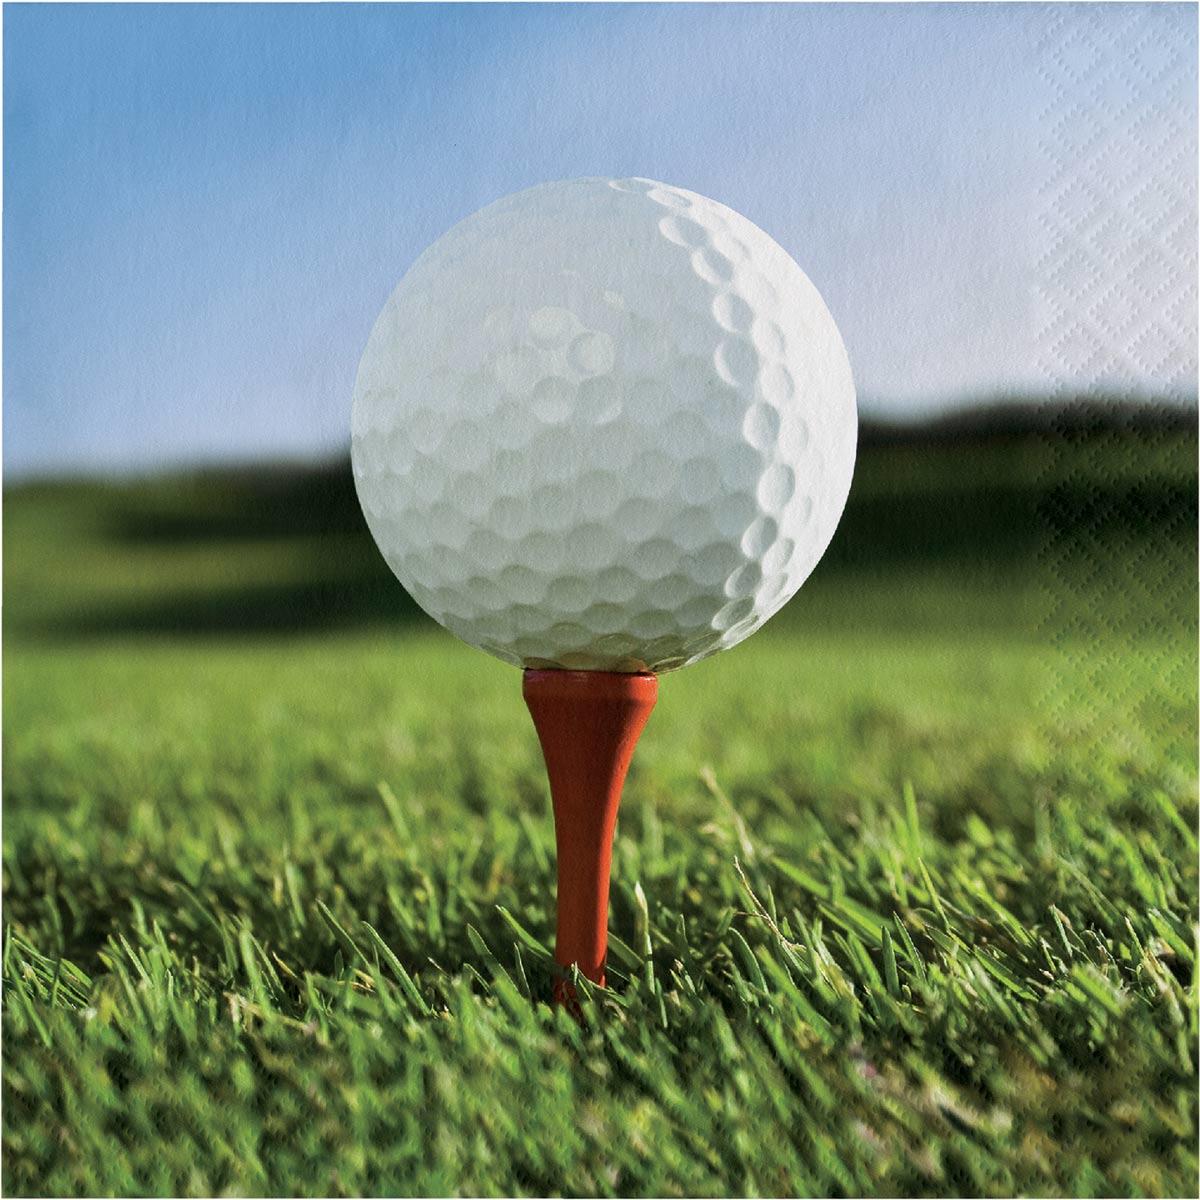 Pk 18 Sports Fantastic Golf Luncheon Napkins by Creative Party 667965 available here at Karnival Costumes online party shop